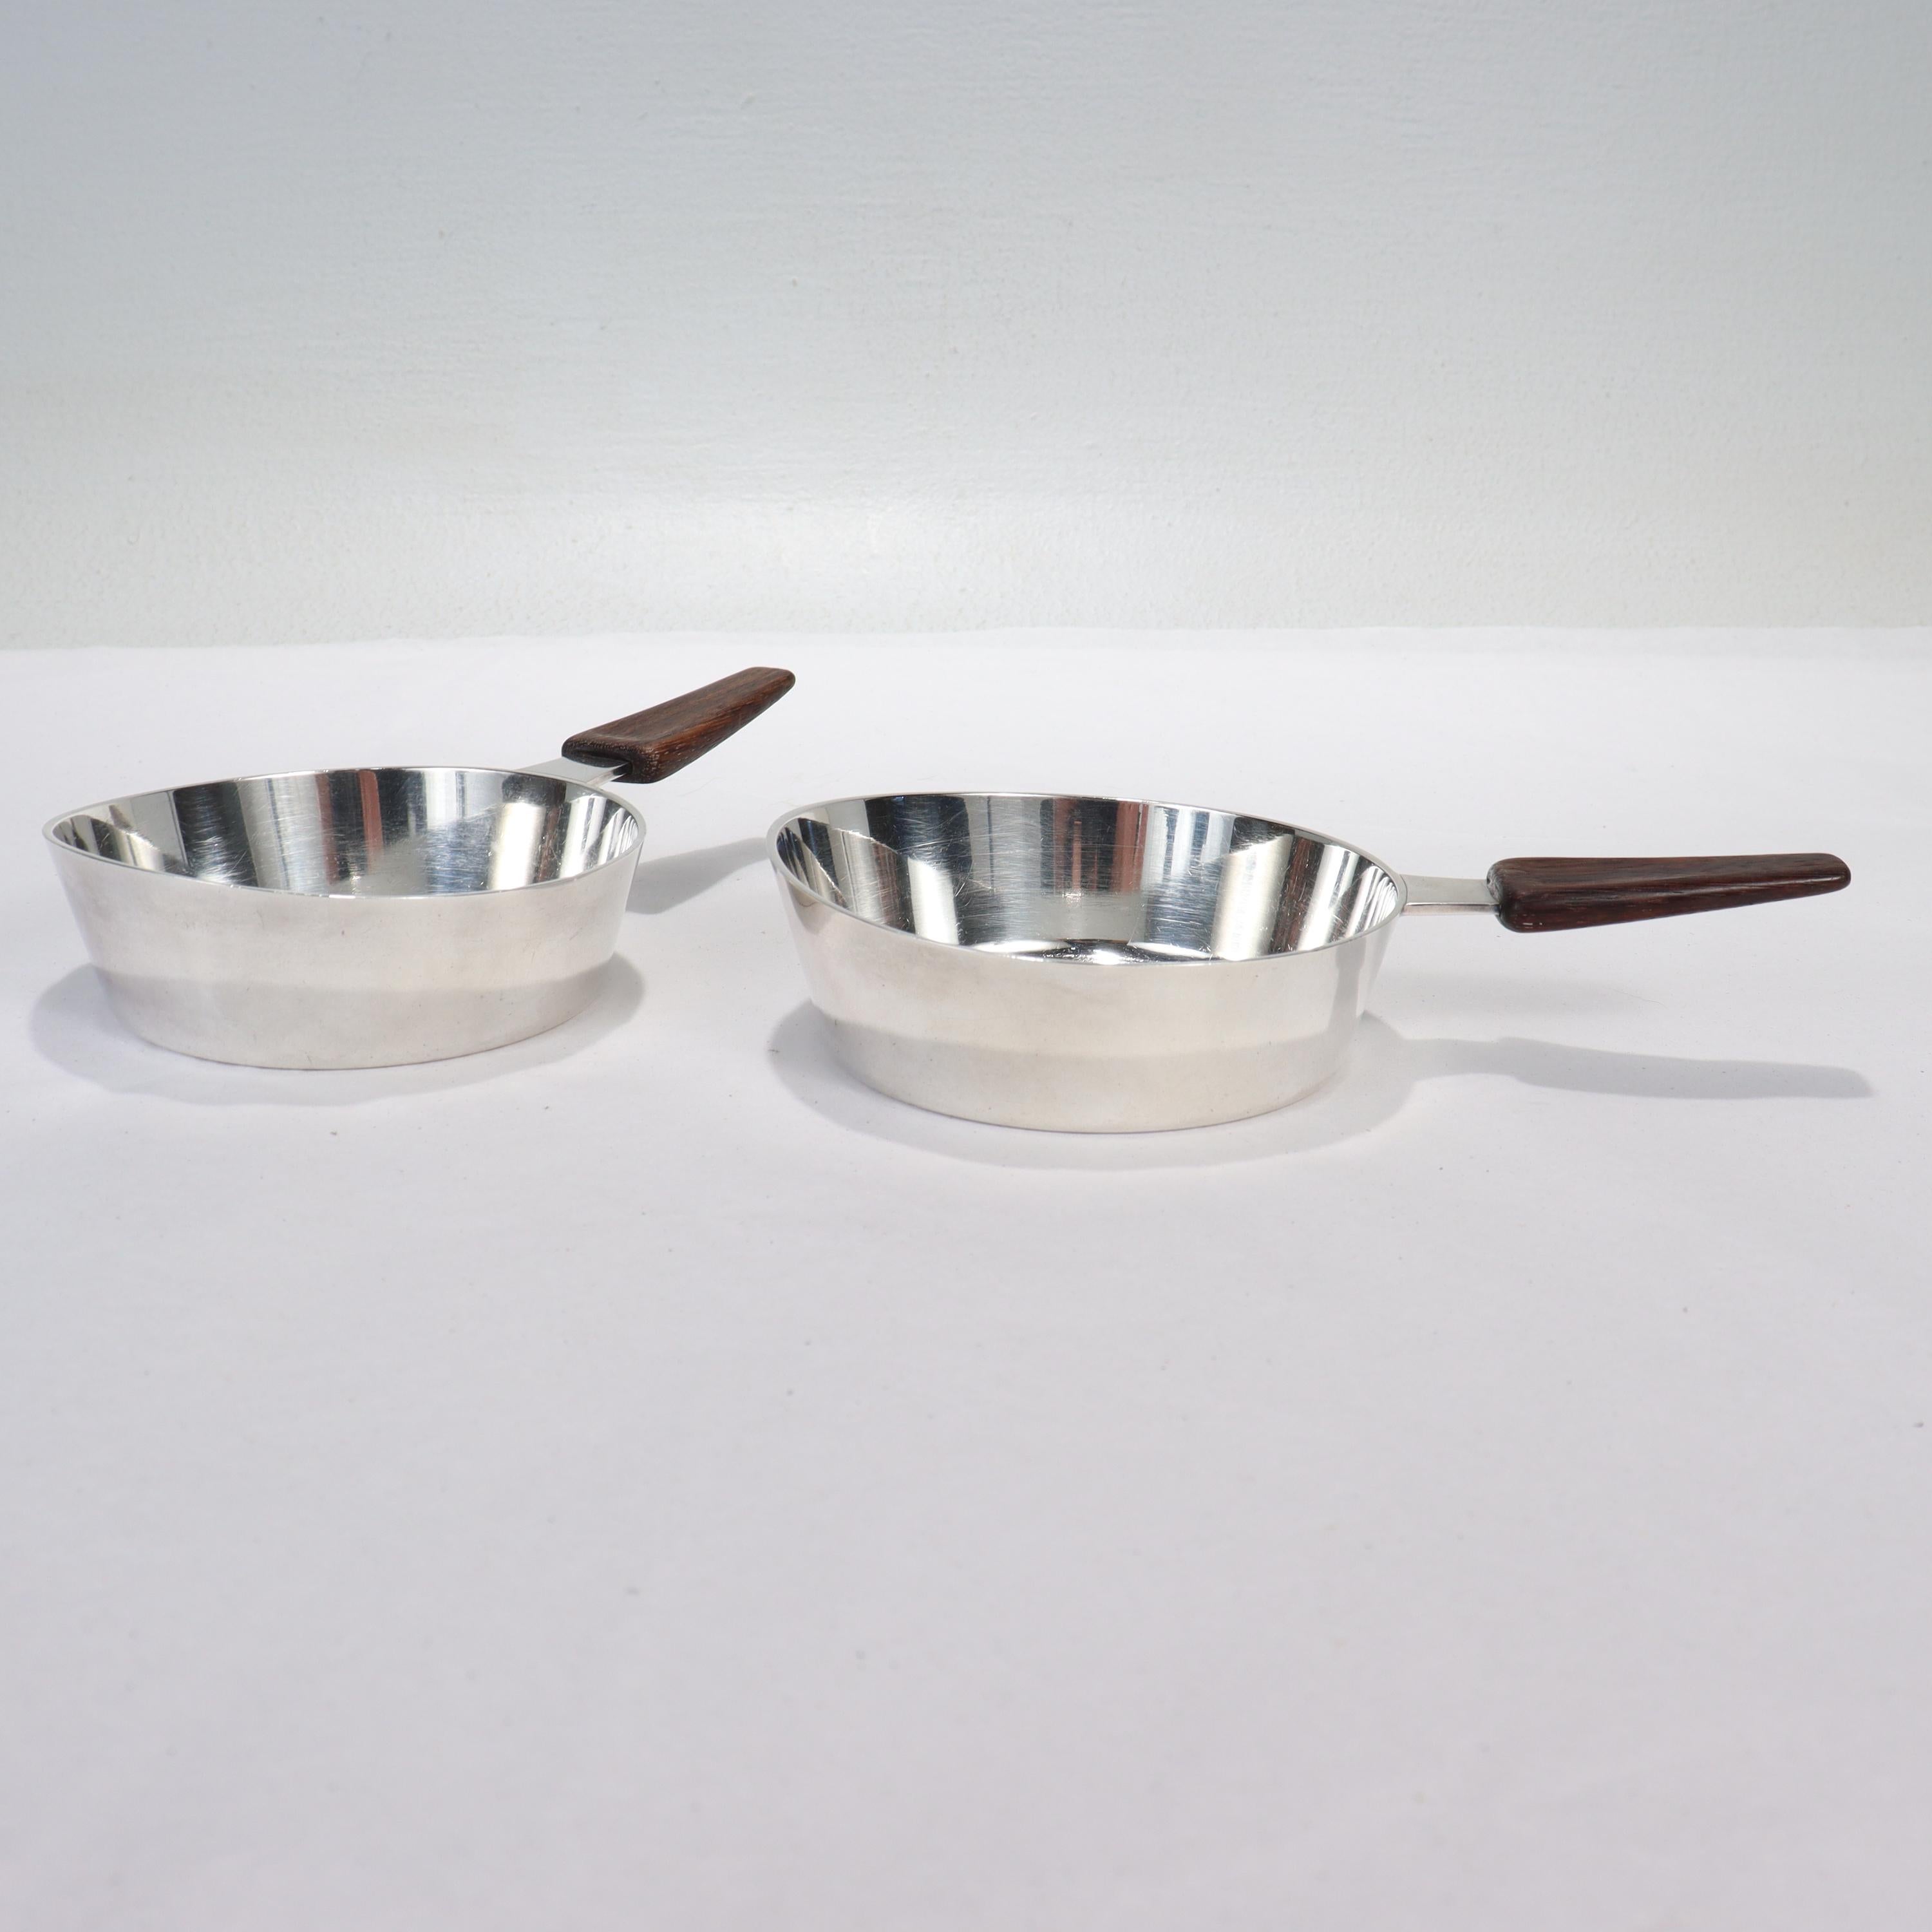 Pair Swedish Modernist Sterling Silver Dishes by Helge Lingren for Kay Anderson In Good Condition For Sale In Philadelphia, PA